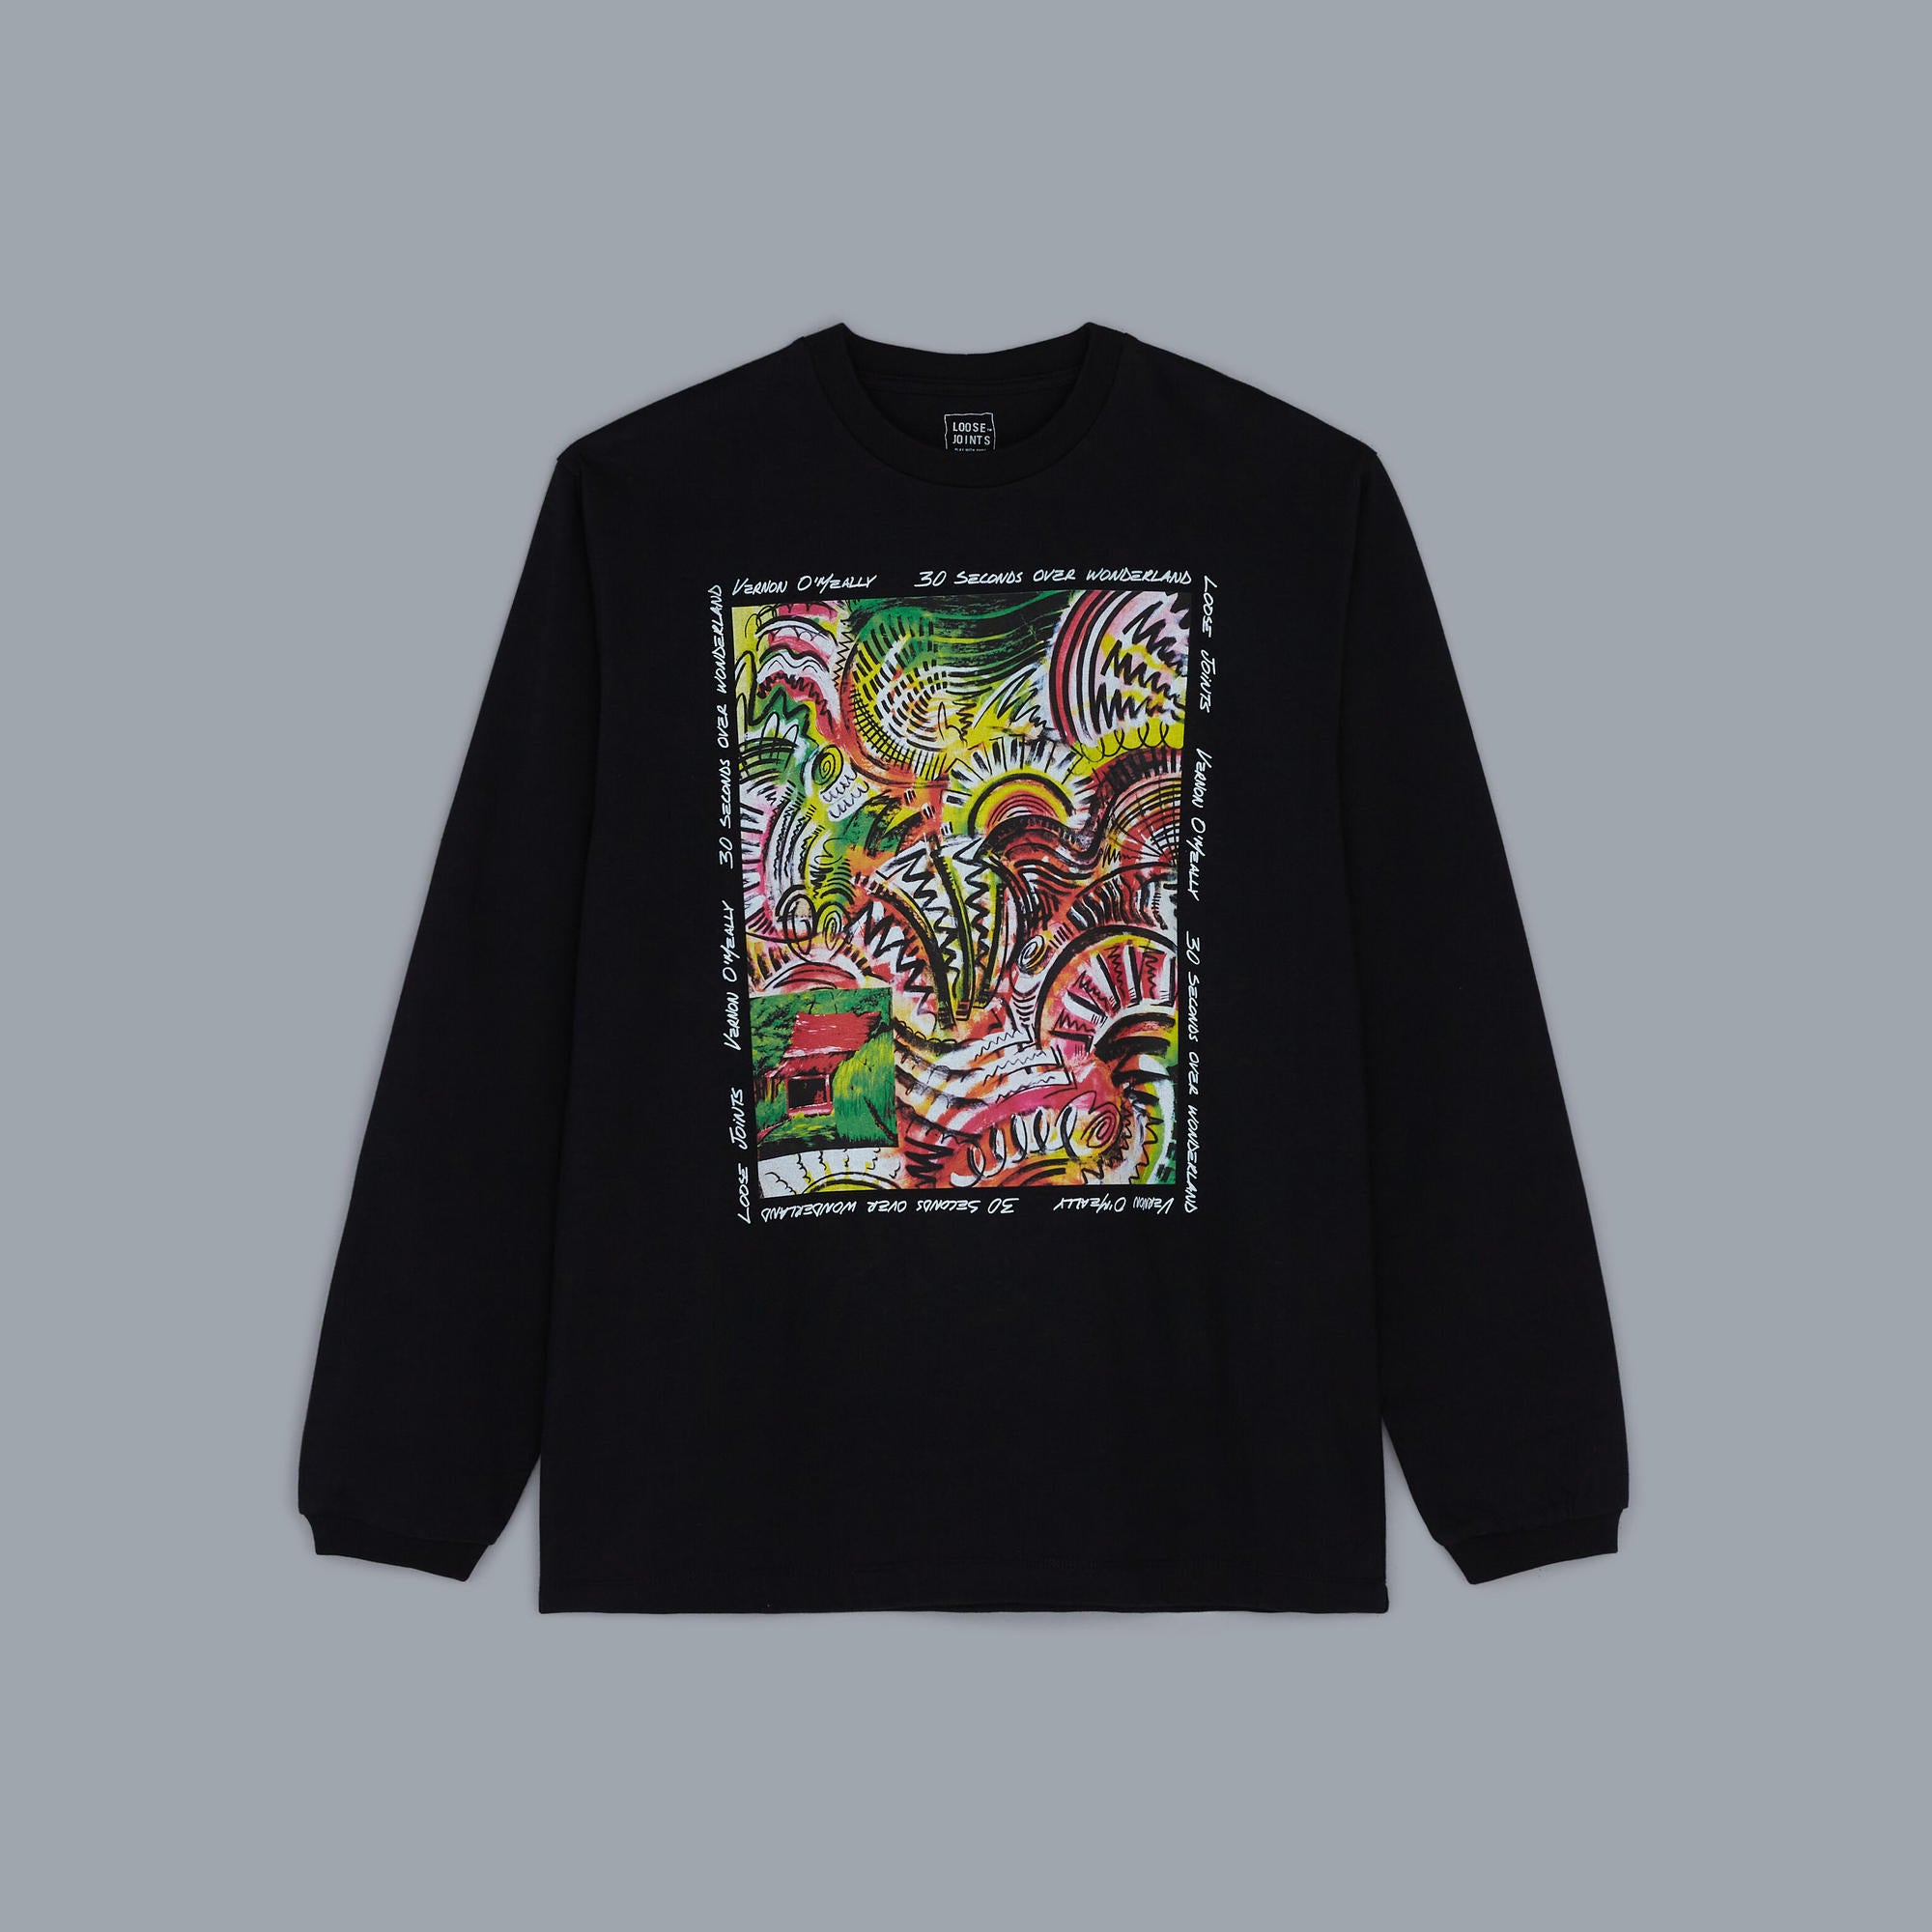 VERNON O’MEALLY - '30 SECONDS OVER WONDERLAND' L/S TEE